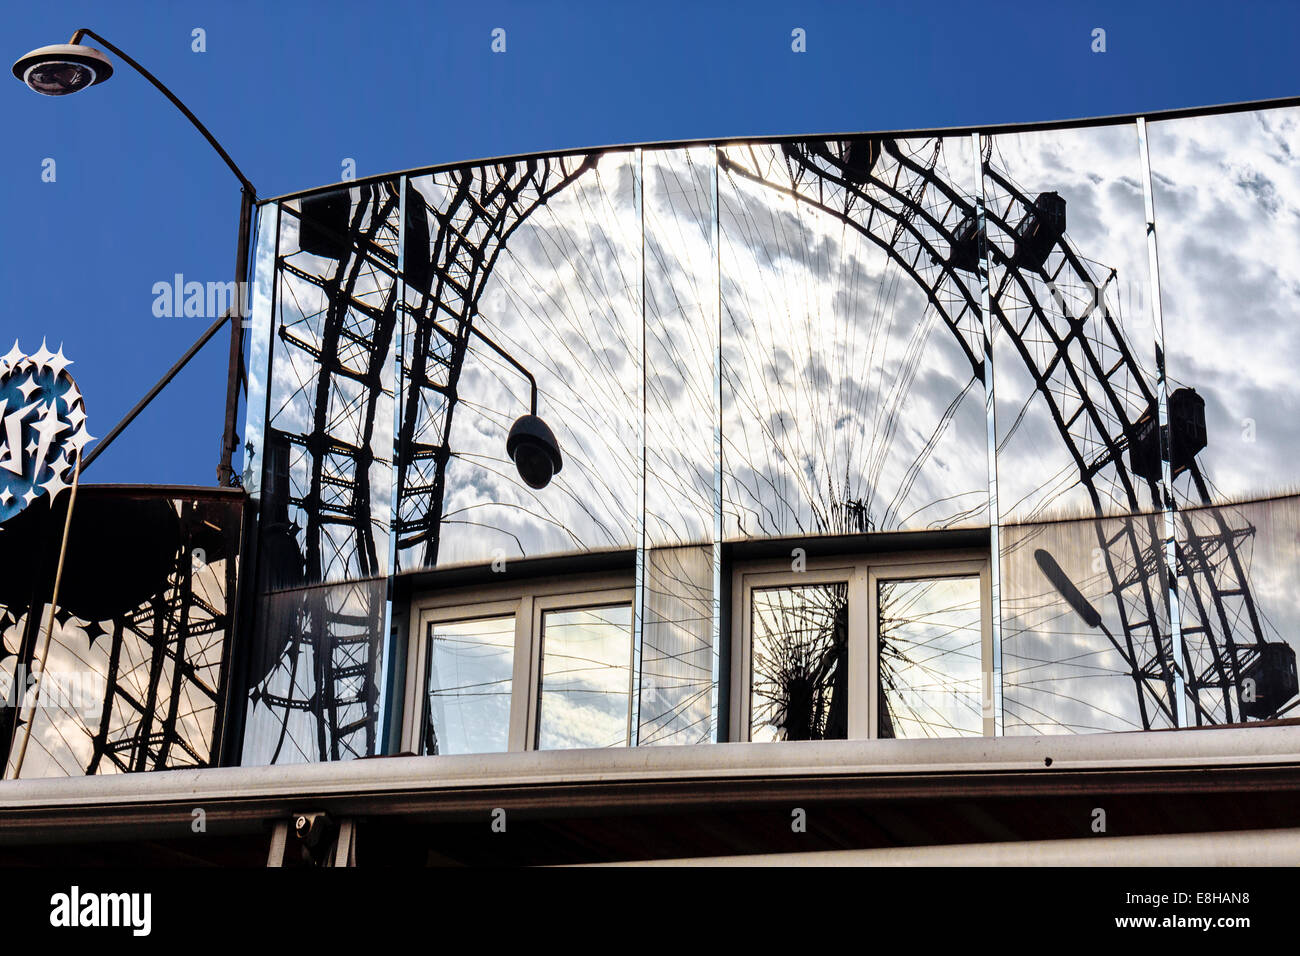 Austria, Vienna, Prater, reflection of Viennese giant wheel in a glass facade Stock Photo